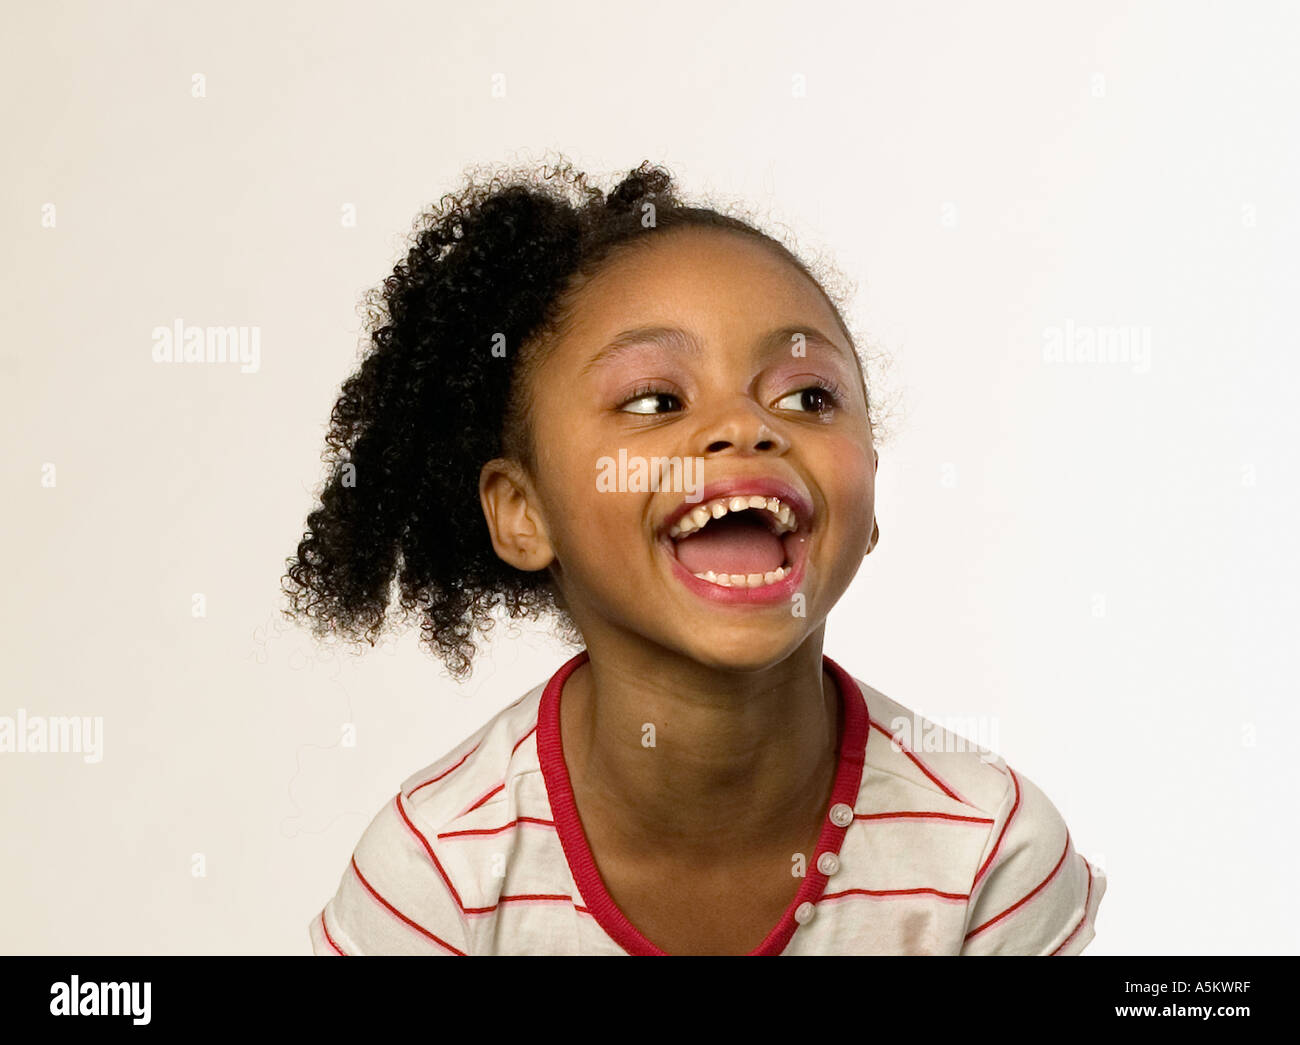 Portrait of a happy African American girl Stock Photo